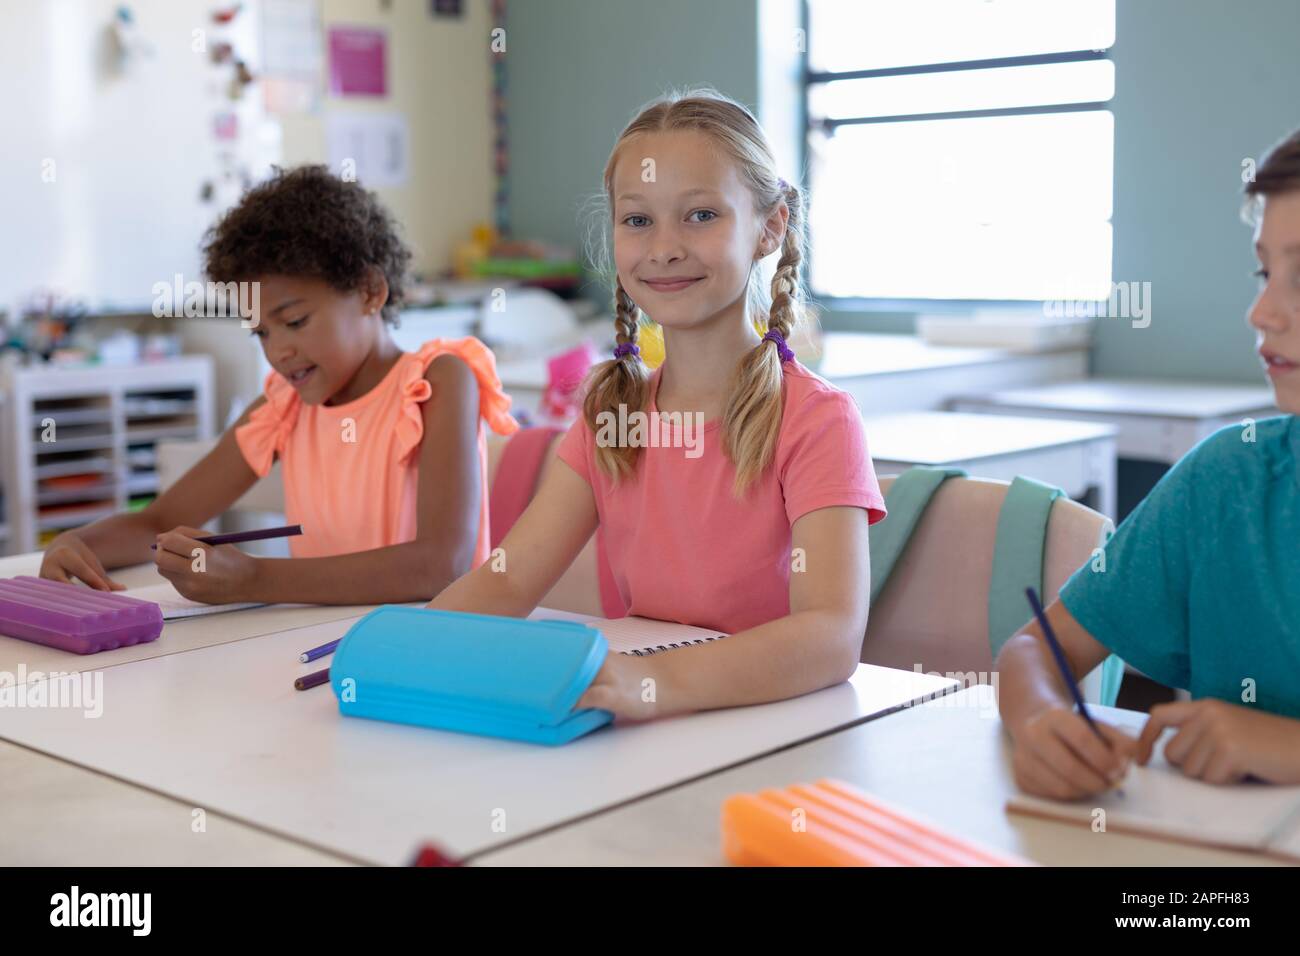 Schoolgirl with blonde plaits sitting at a desk in an elementary school classroom Stock Photo